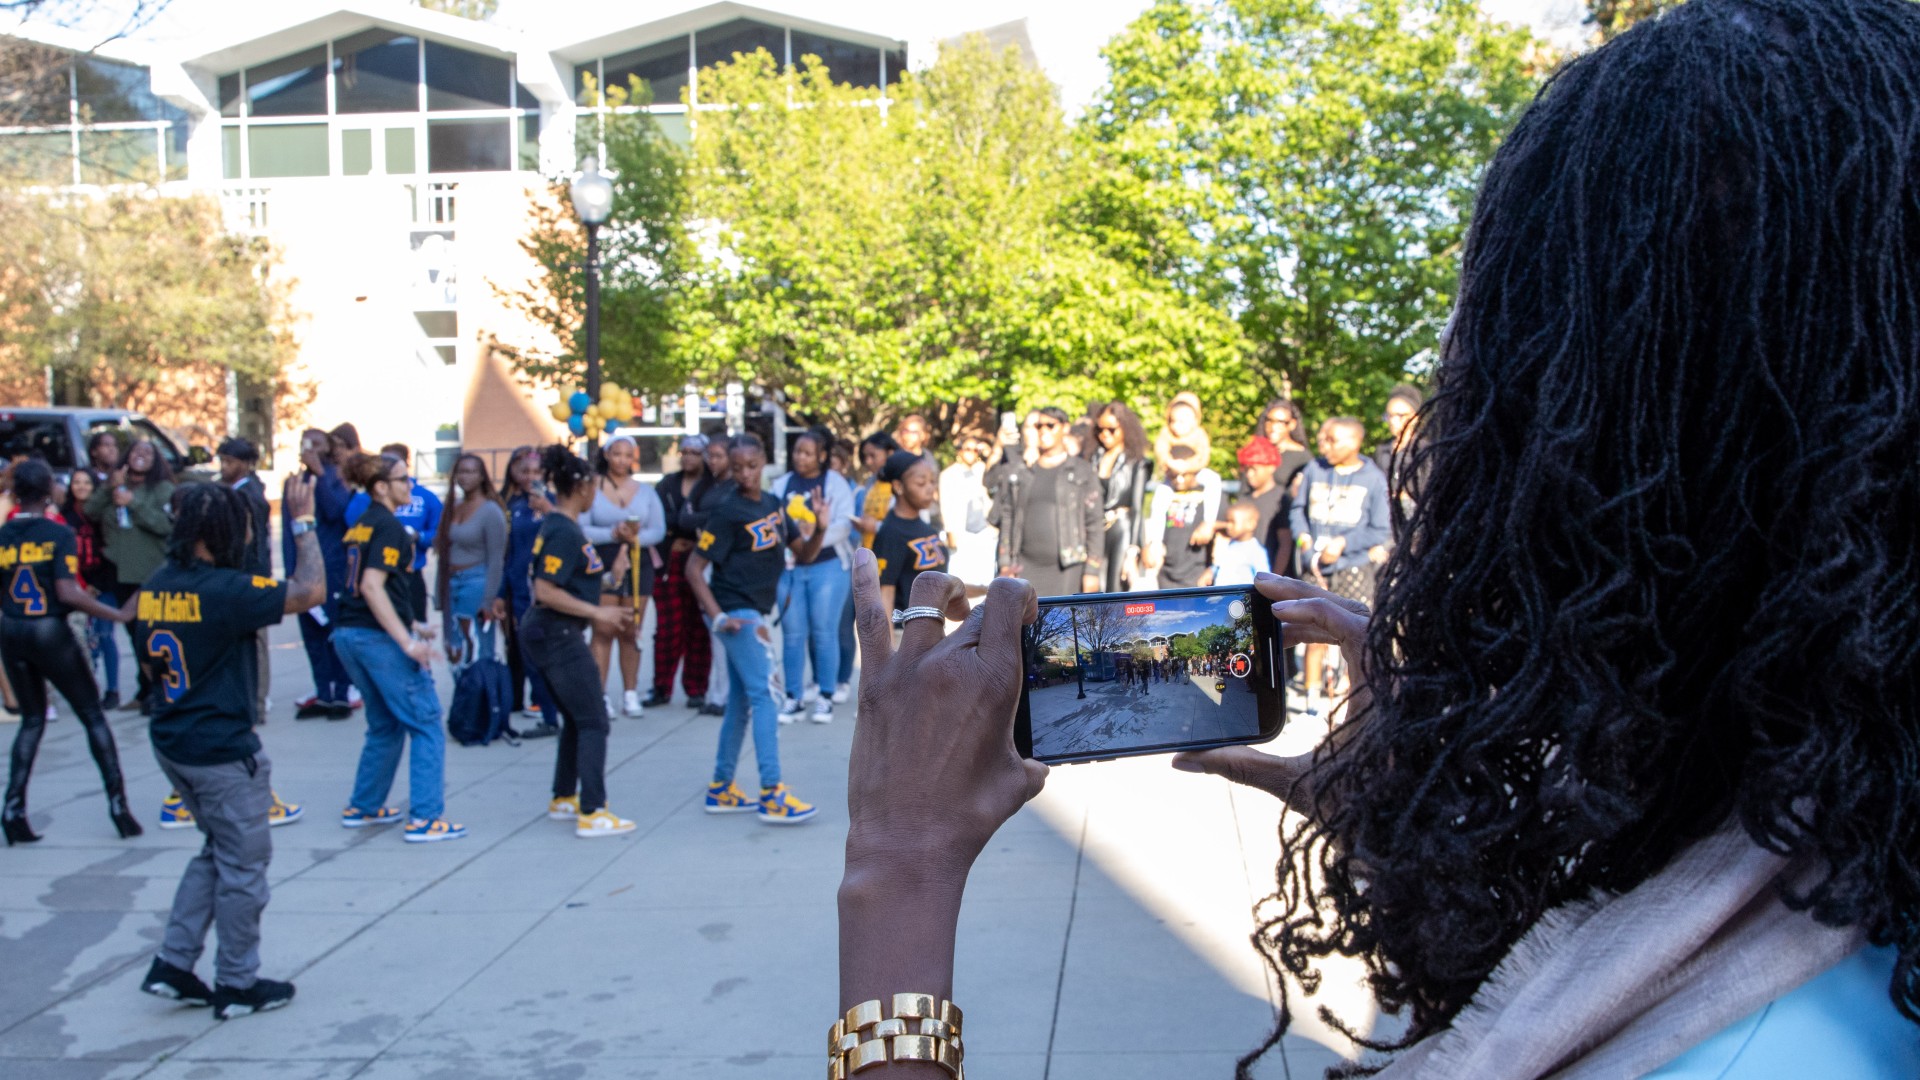 Dr. Kinloch catches video of students during the post-Inauguration party on the block